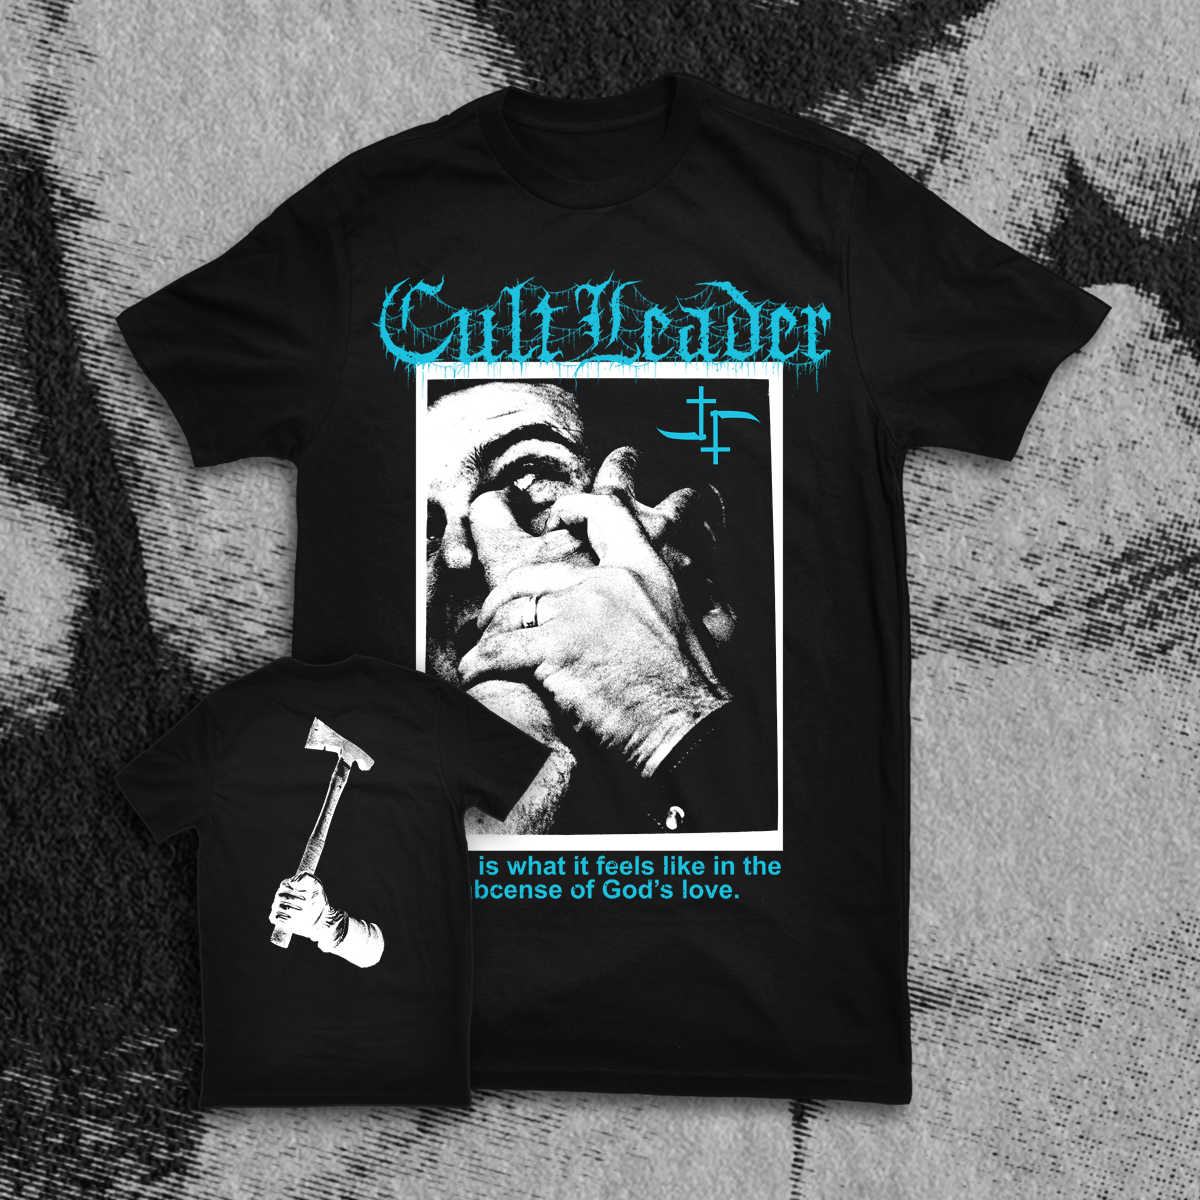 CULT LEADER "THIS IS WHAT IT FEELS LIKE" SHIRT (PRE-ORDER)